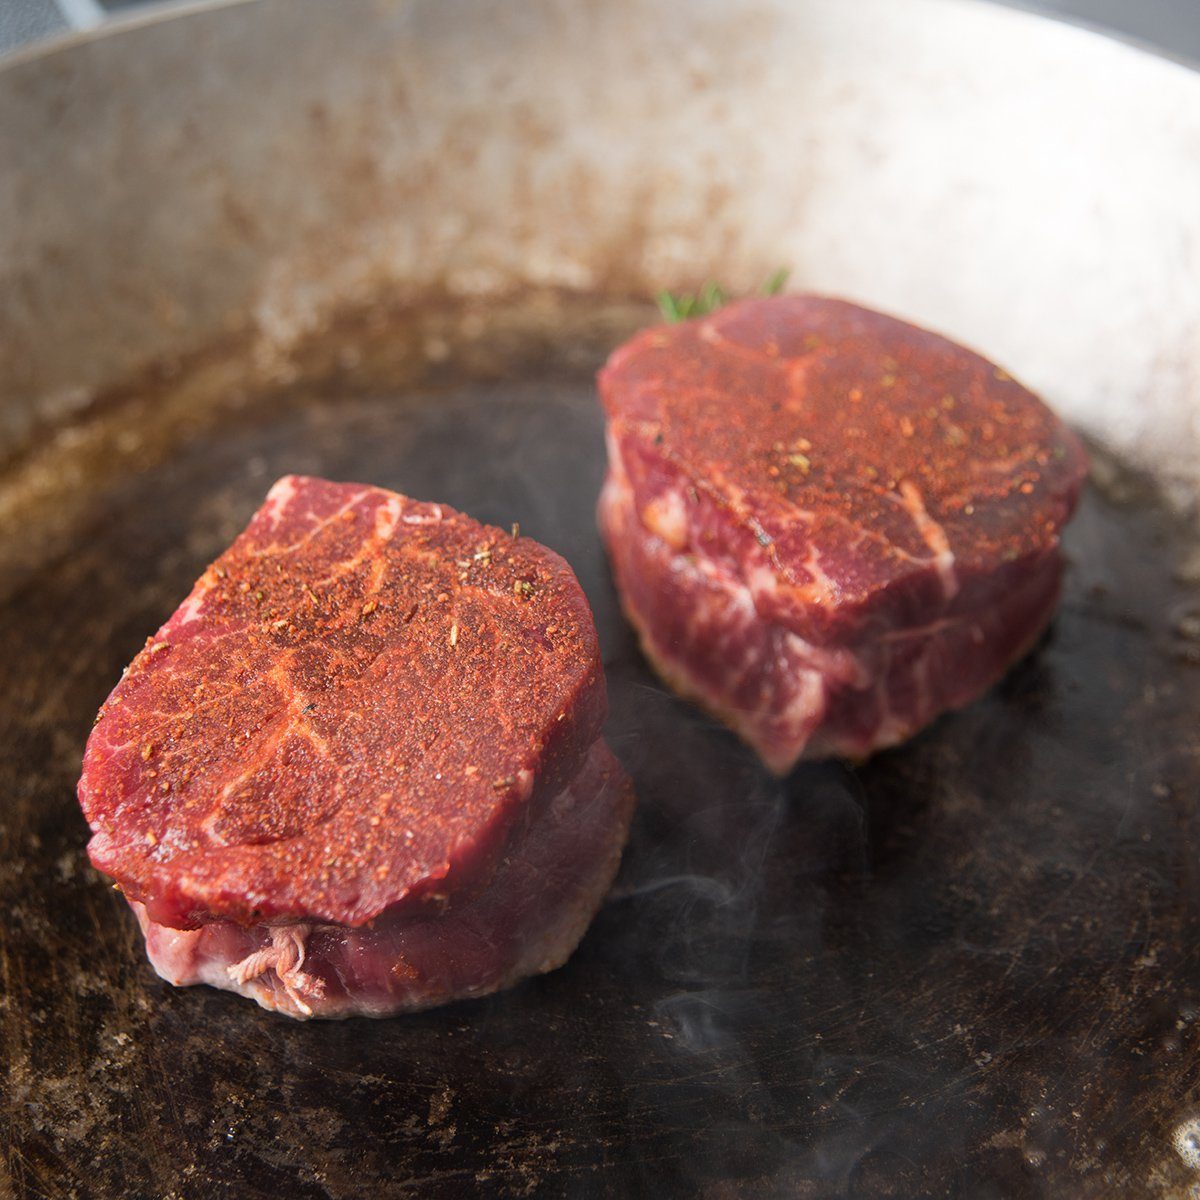 Two Filet Mignon Steaks Being Cooked on Hot Stainless Steel Skillet; Shutterstock ID 224139040; Job (TFH, TOH, RD, BNB, CWM, CM): TOH